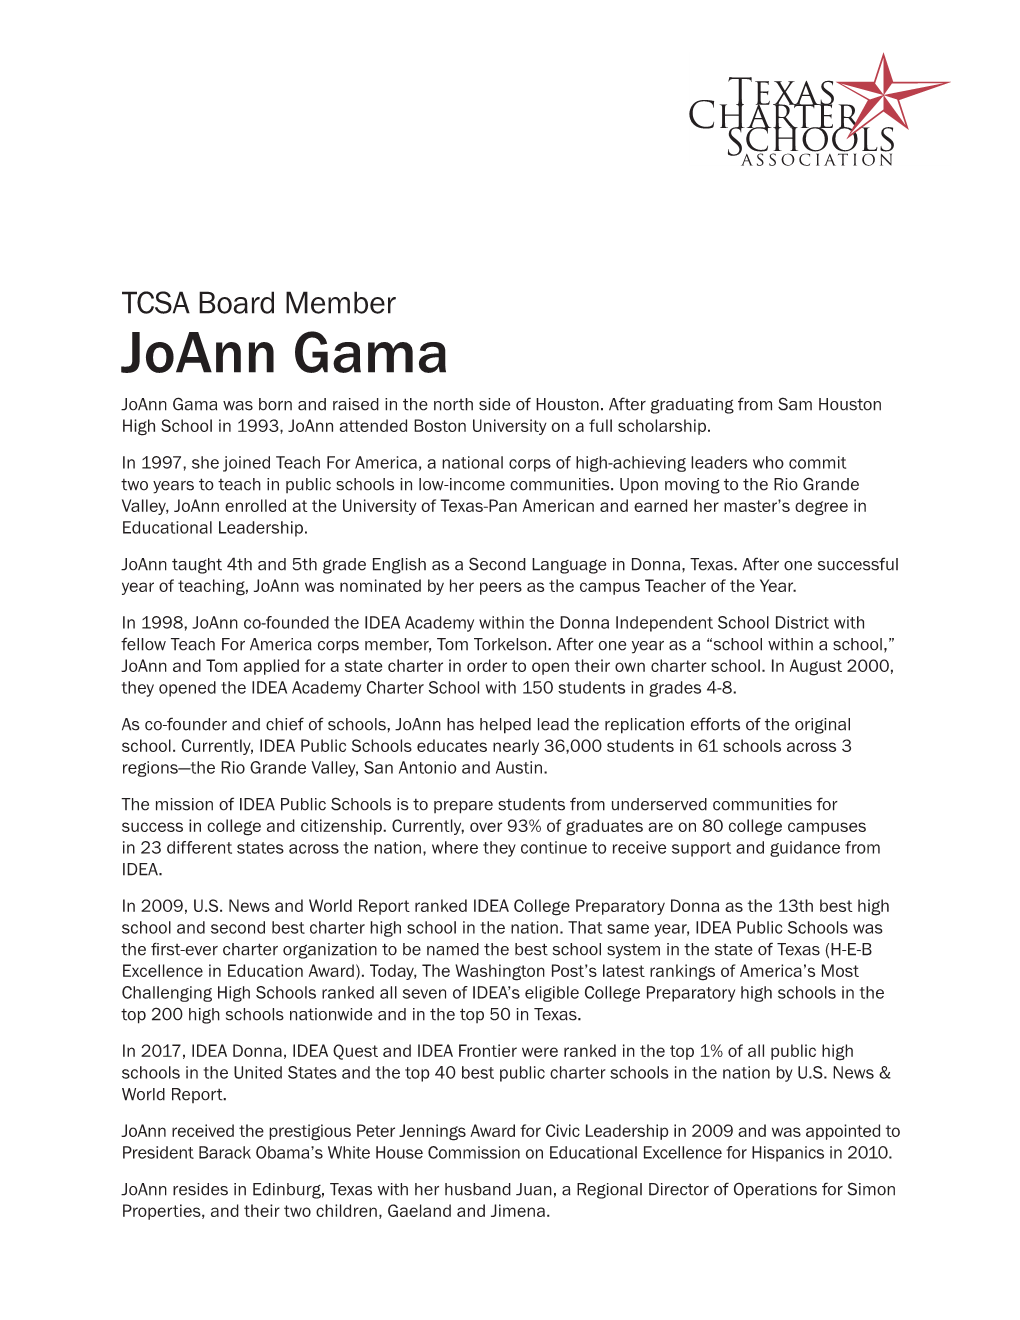 Joann Gama Joann Gama Was Born and Raised in the North Side of Houston